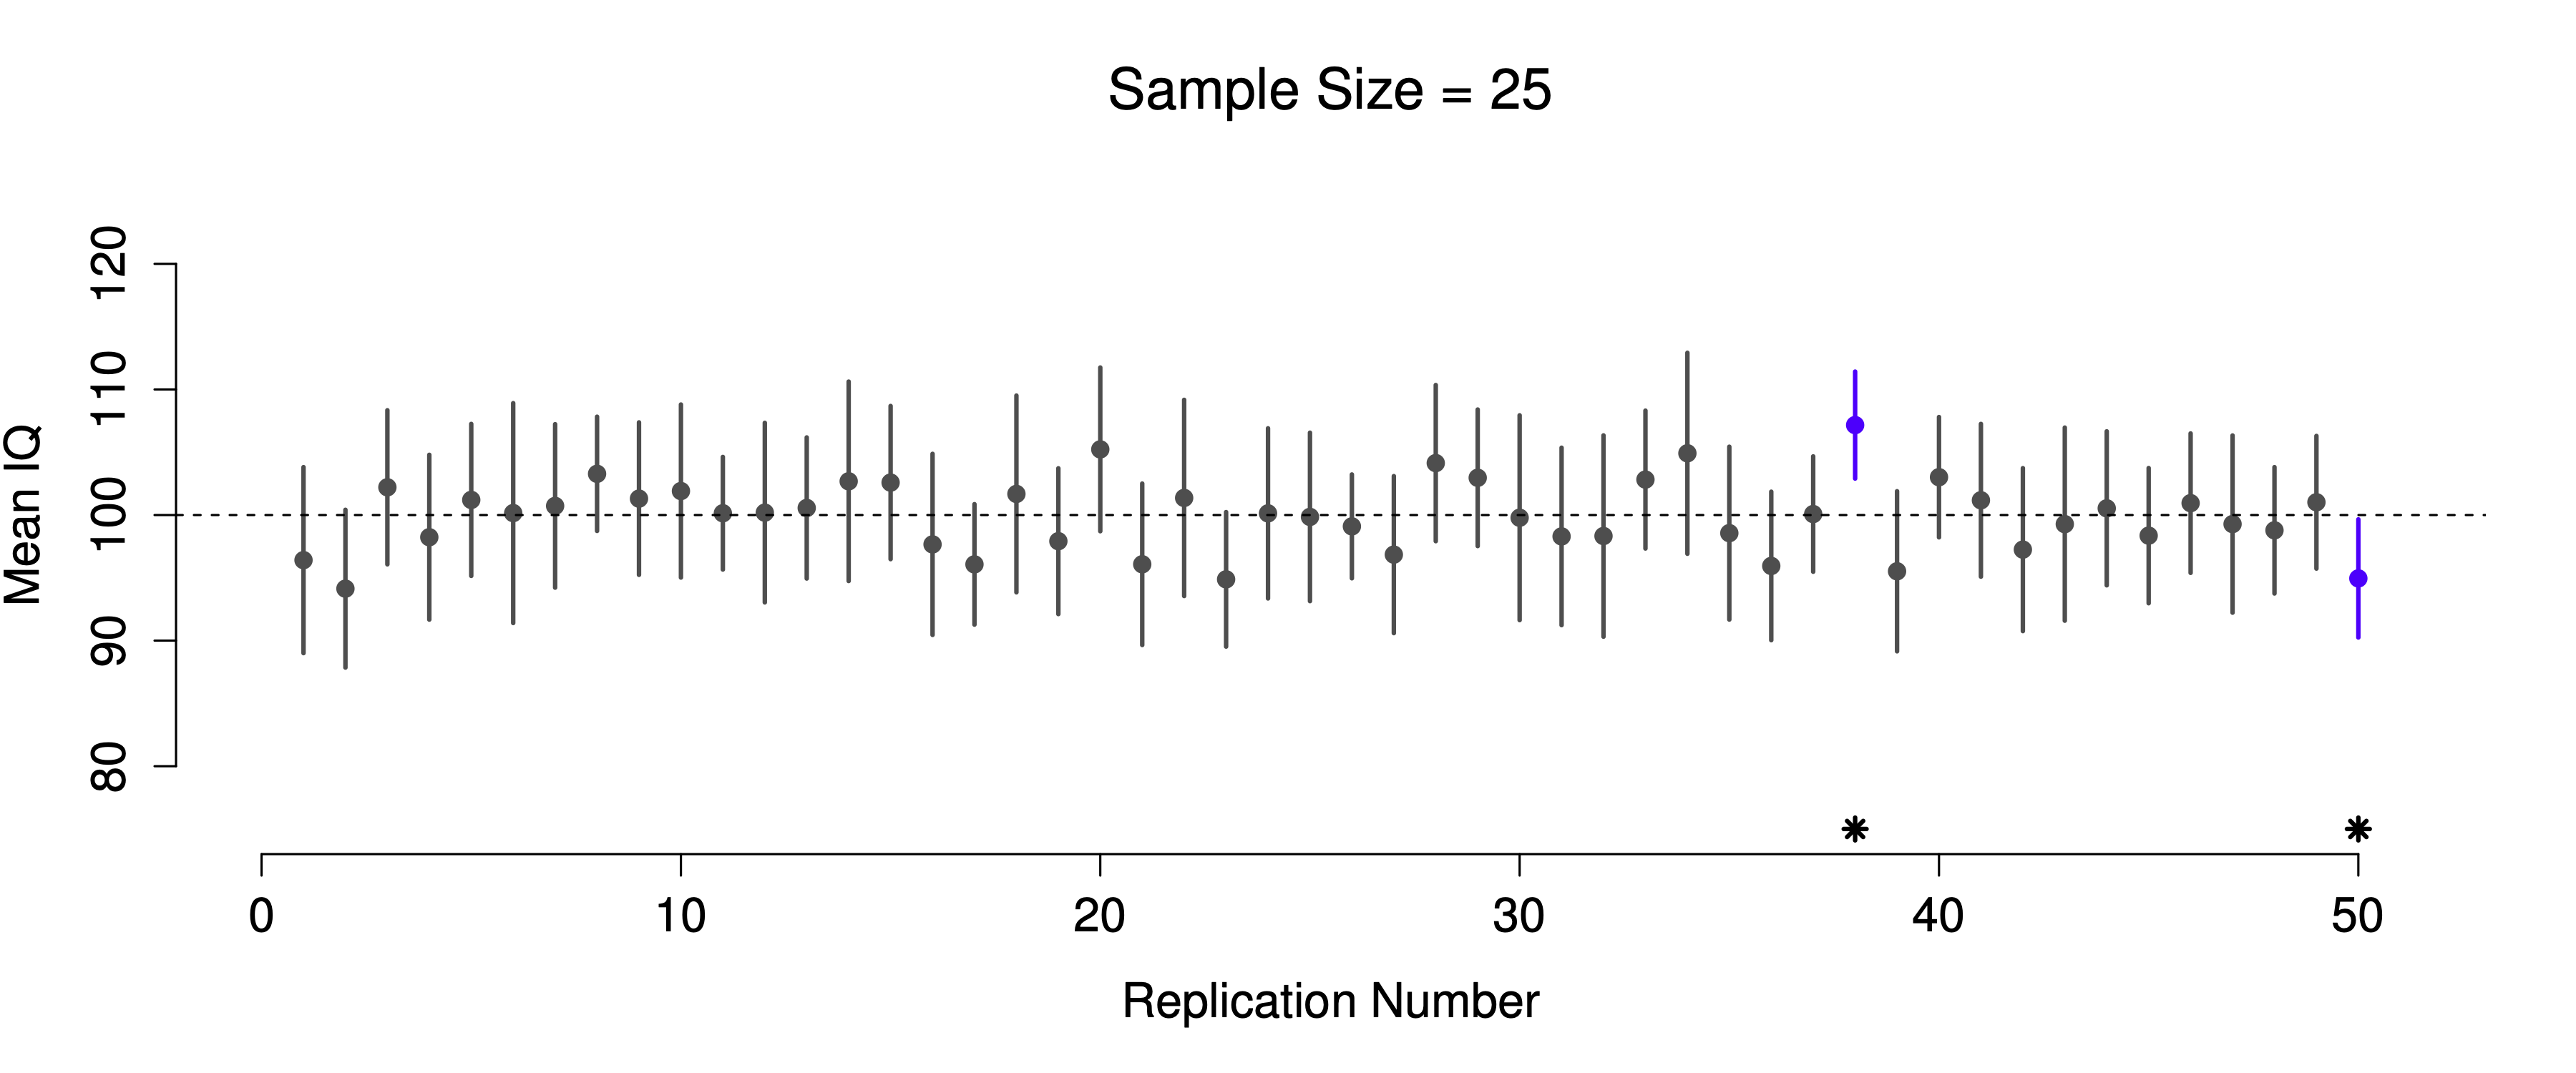 95% confidence intervals. The top (panel a) shows 50 simulated replications of an experiment in which we measure the IQs of 10 people. The dot marks the location of the sample mean, and the line shows the 95% confidence interval. In total 47 of the 50 confidence intervals do contain the true mean (i.e., 100), but the three intervals marked with asterisks do not. The lower graph (panel b) shows a similar simulation, but this time we simulate replications of an experiment that measures the IQs of 25 people.